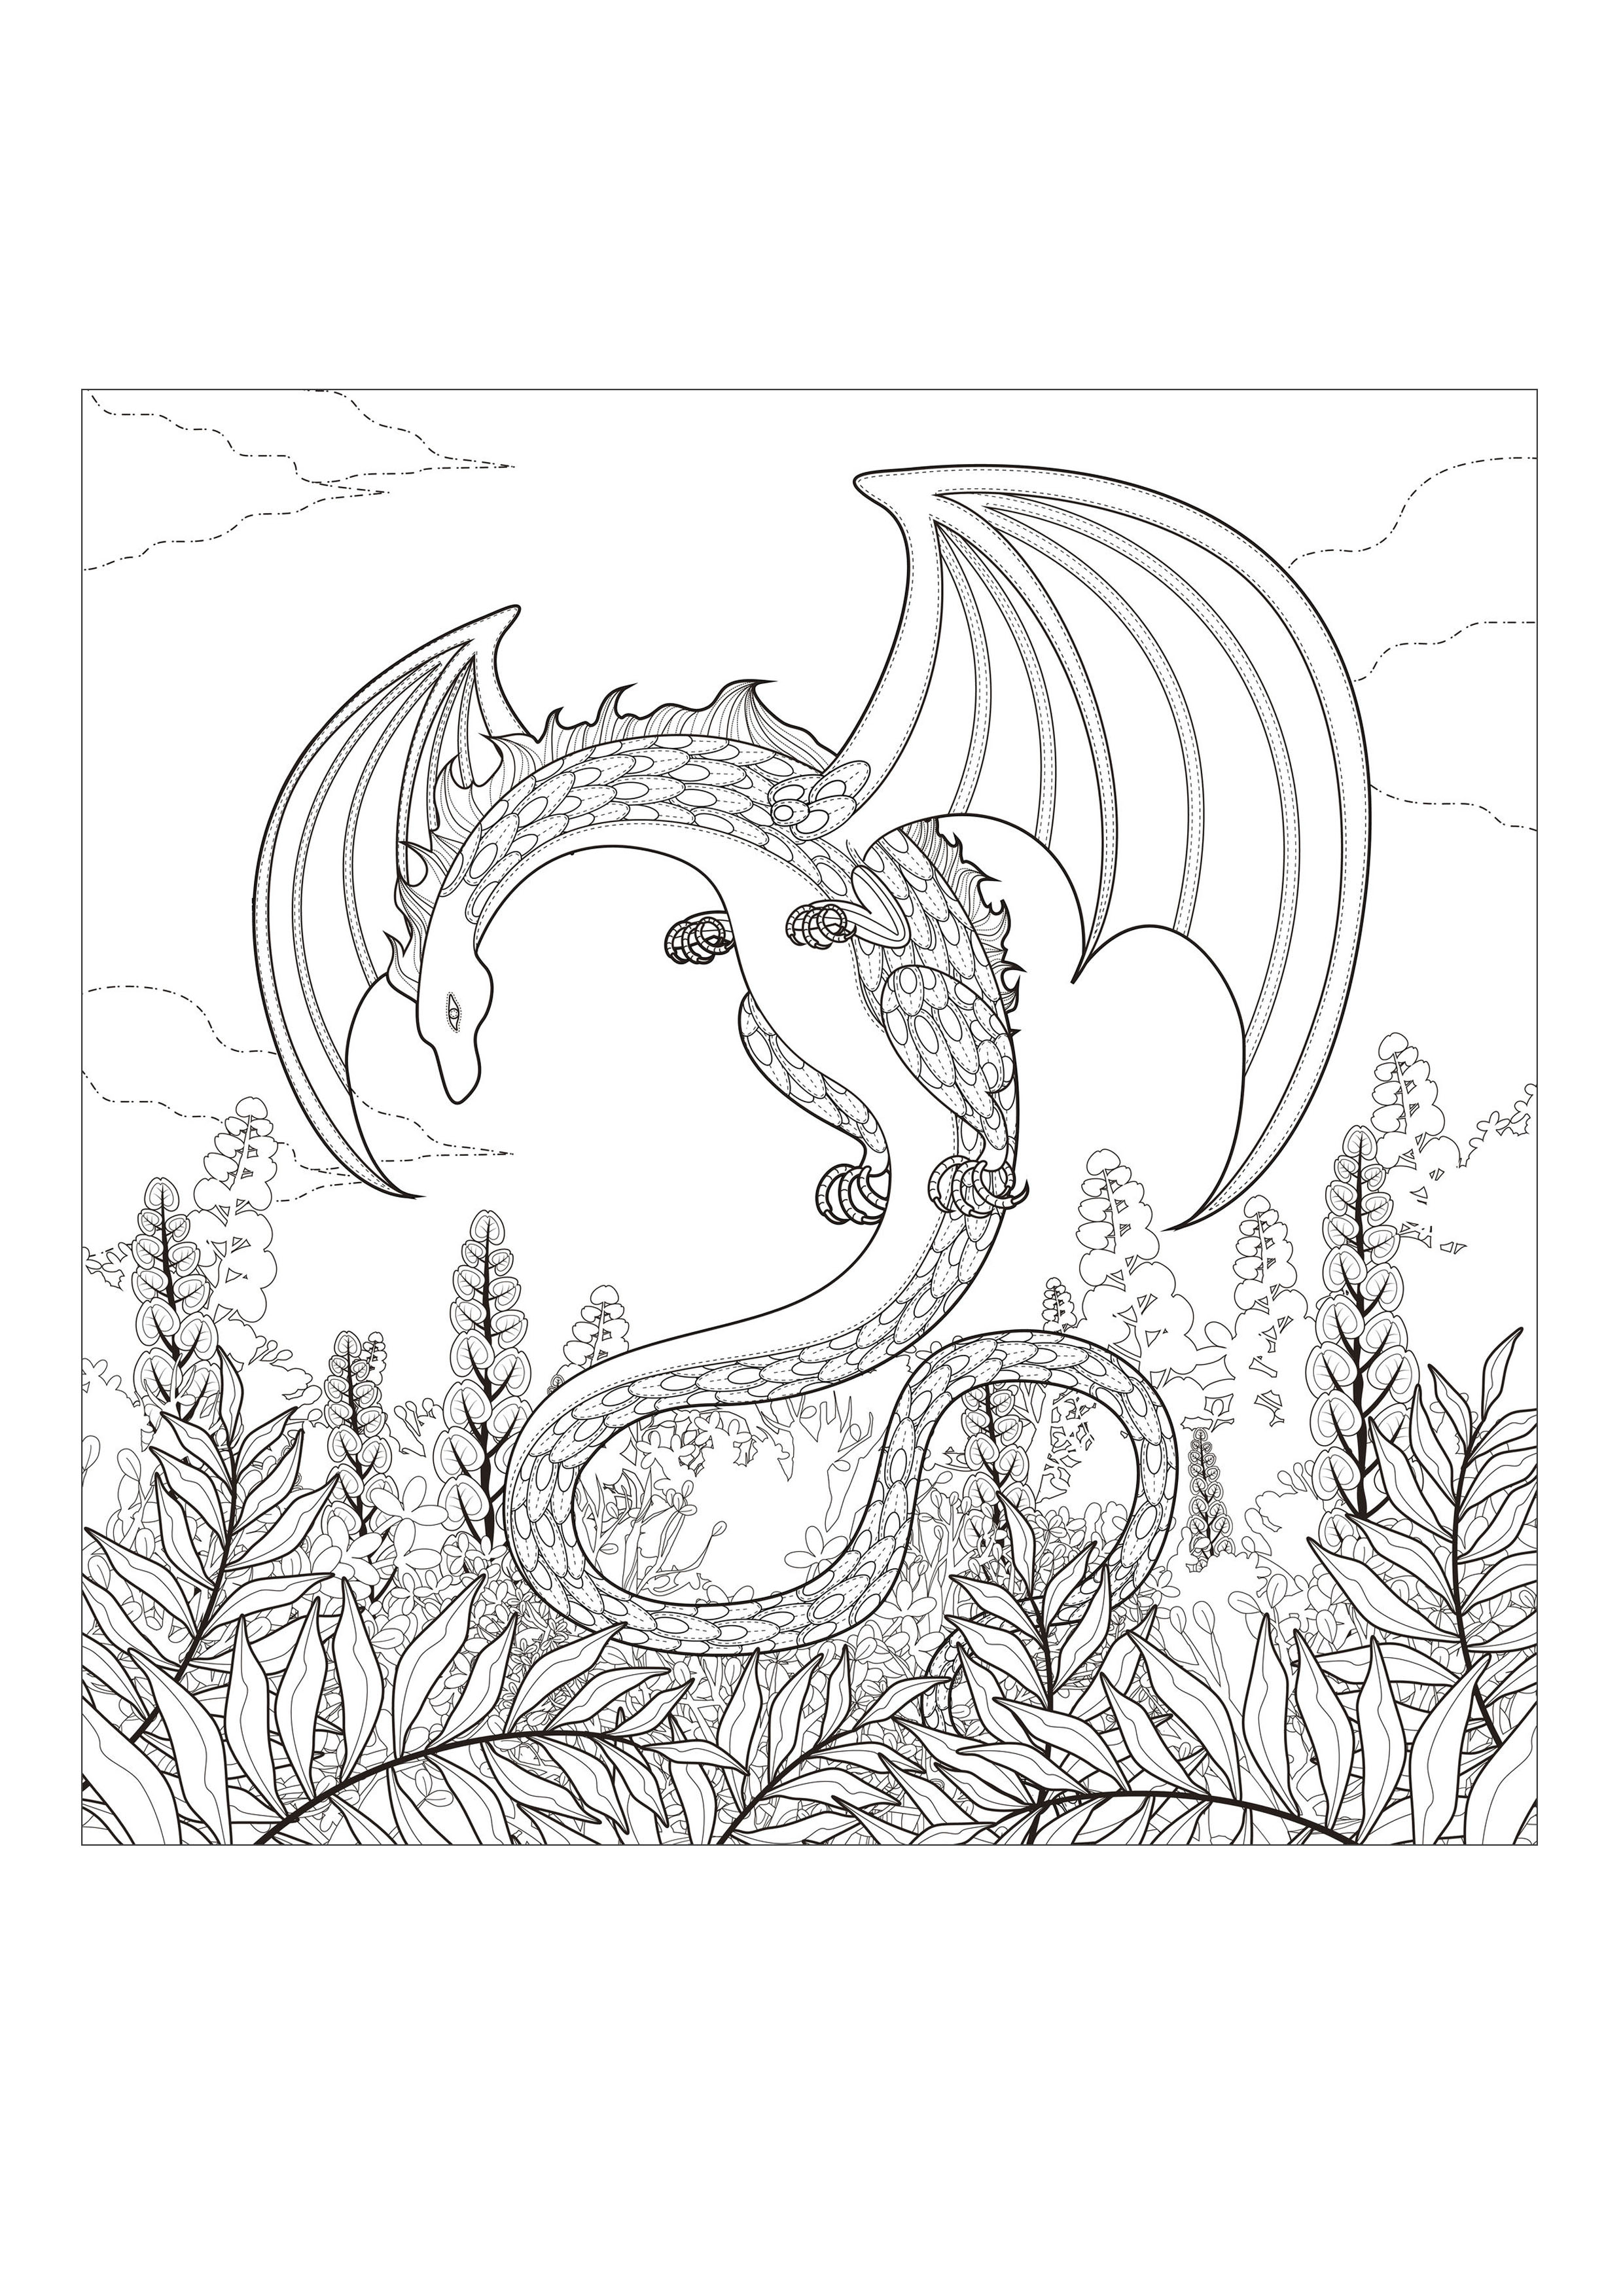 Monster Coloring Pages To Print Monster Dragon Dragons Adult Coloring Pages